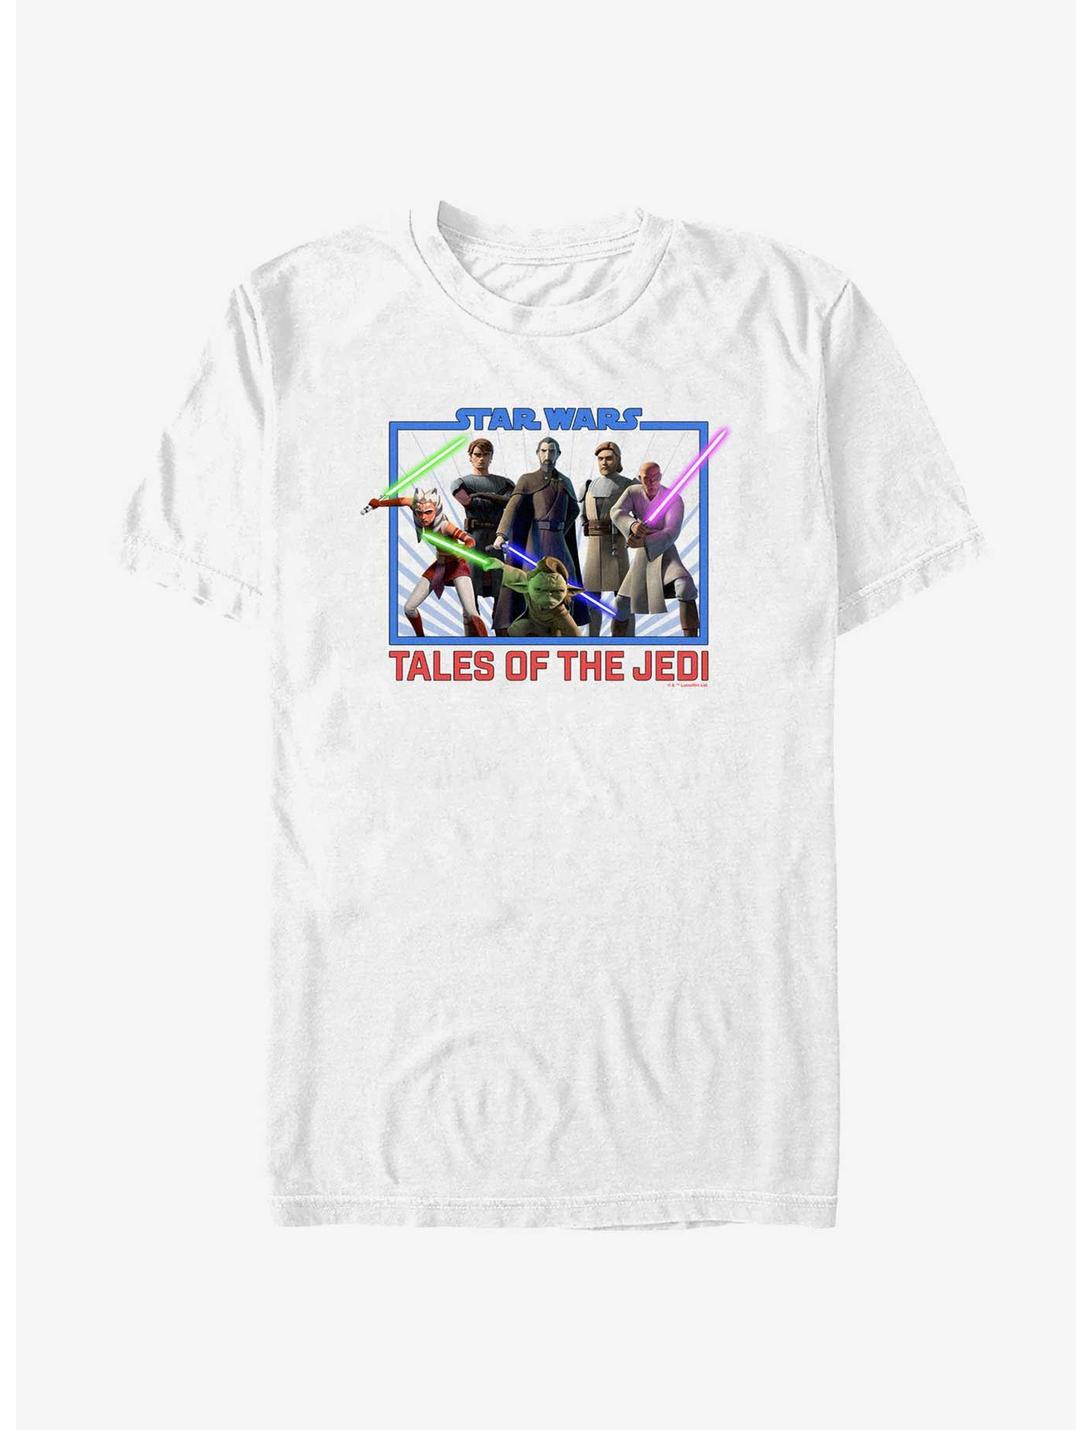 Star Wars: Tales of the Jedi Group T-Shirt, WHITE, hi-res